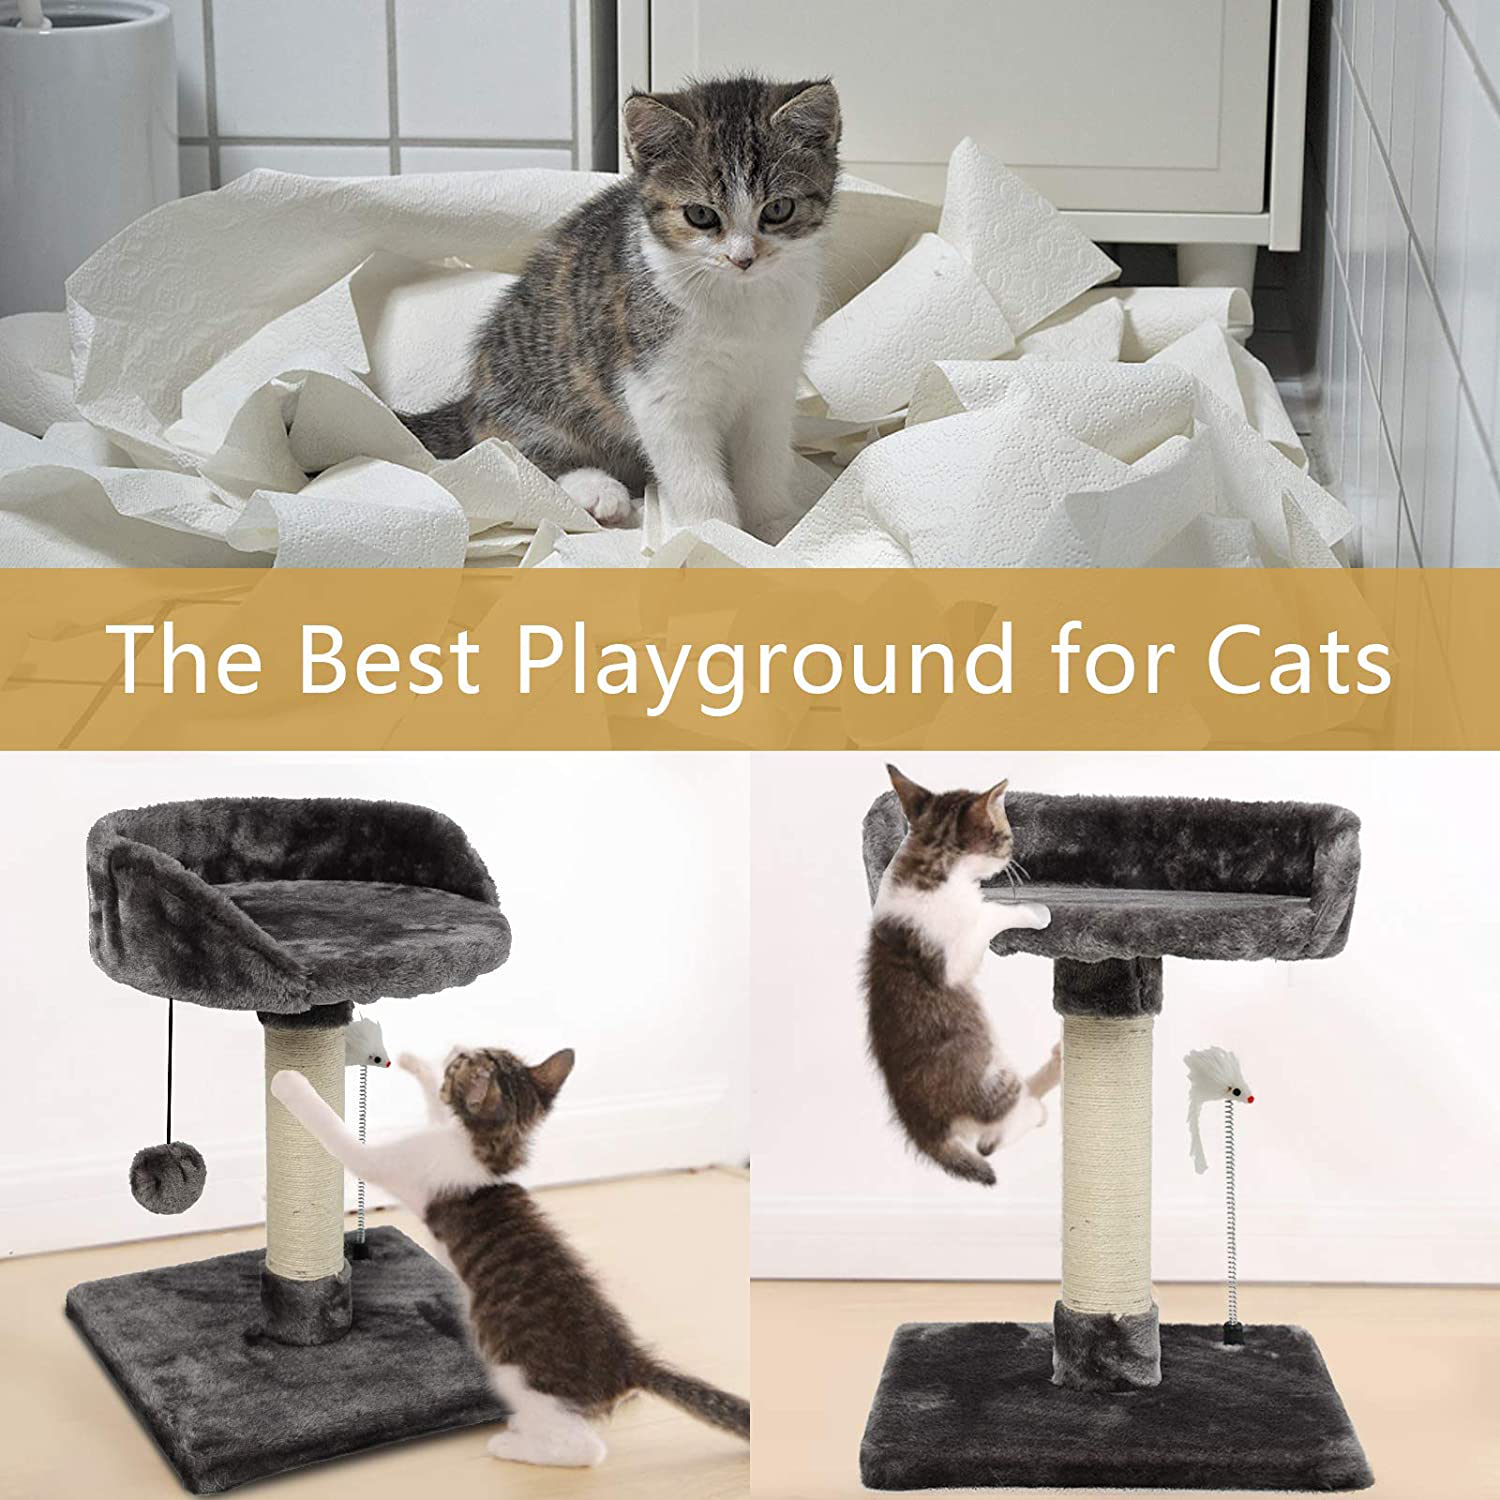 ECOCONUT Cat Scratching Posts with Bed for Kittens, Cat Tower Bed, Cat Activity Tree with Natural Sisal Post, Plush Platform Bed, Hanging Balls and Spring Plush Mouse Toy